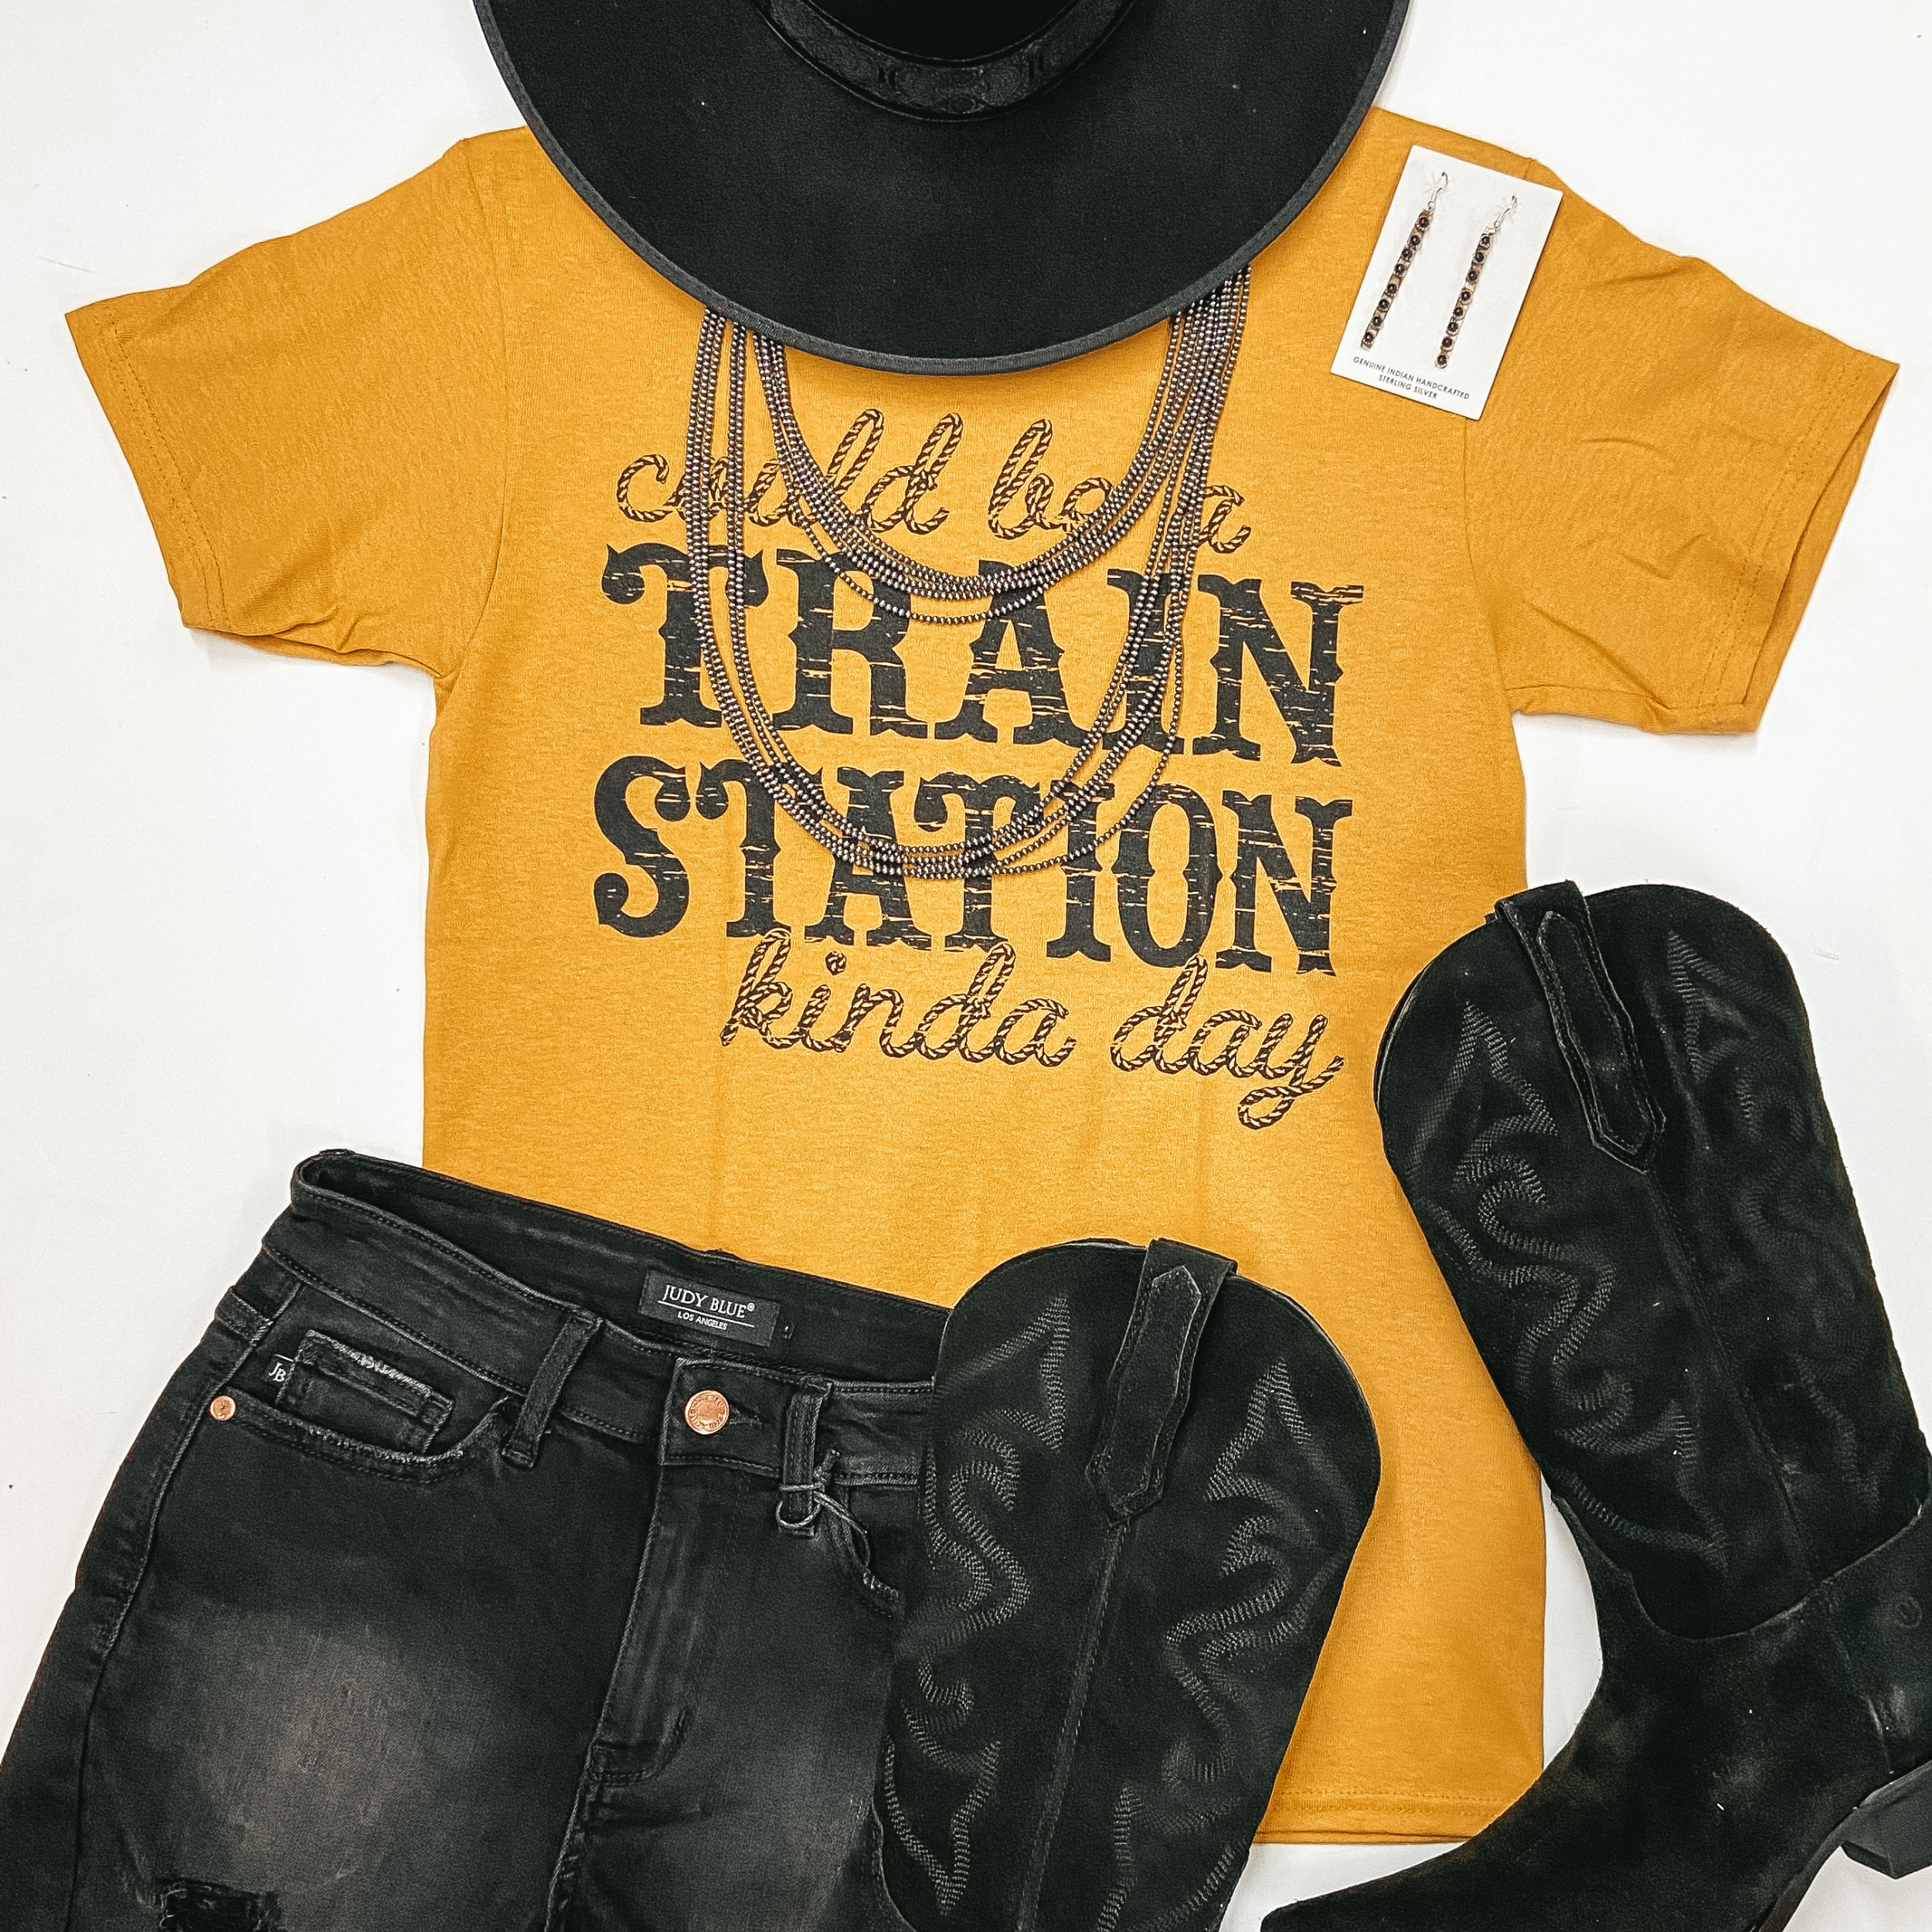 A mustard yellow graphic tee that says "Could Be A Train Station Kinda Day." Pictured on a white background with a black hat, black shorts, and silver jewelry.